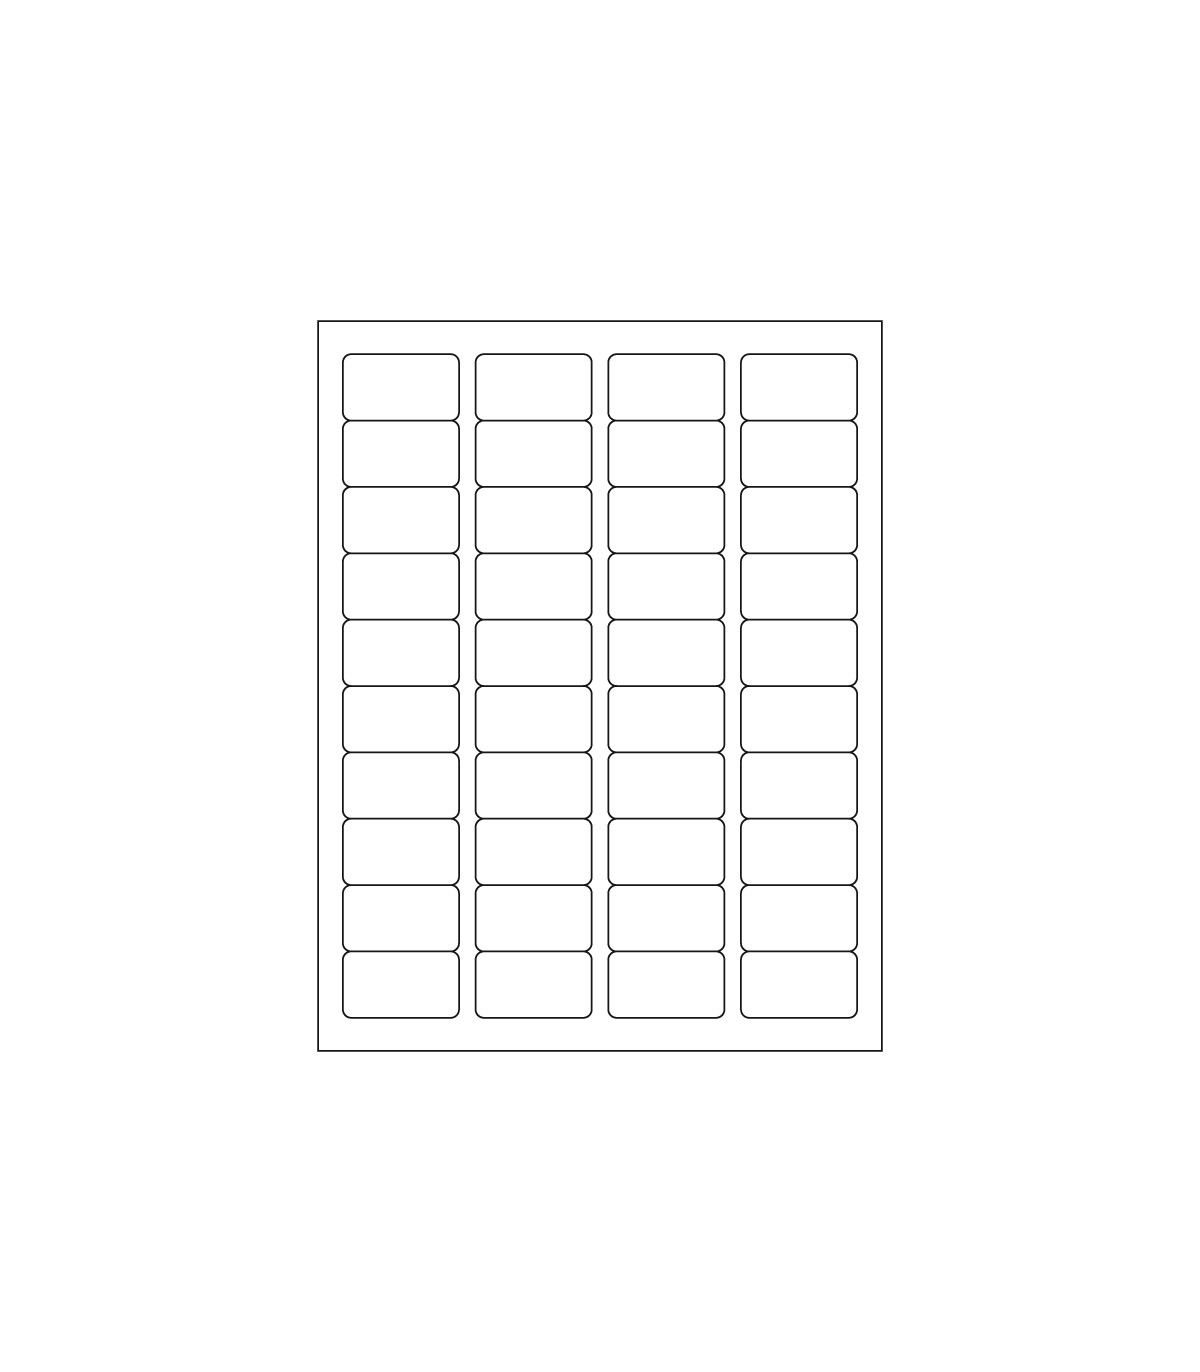 1-x-1-label-template